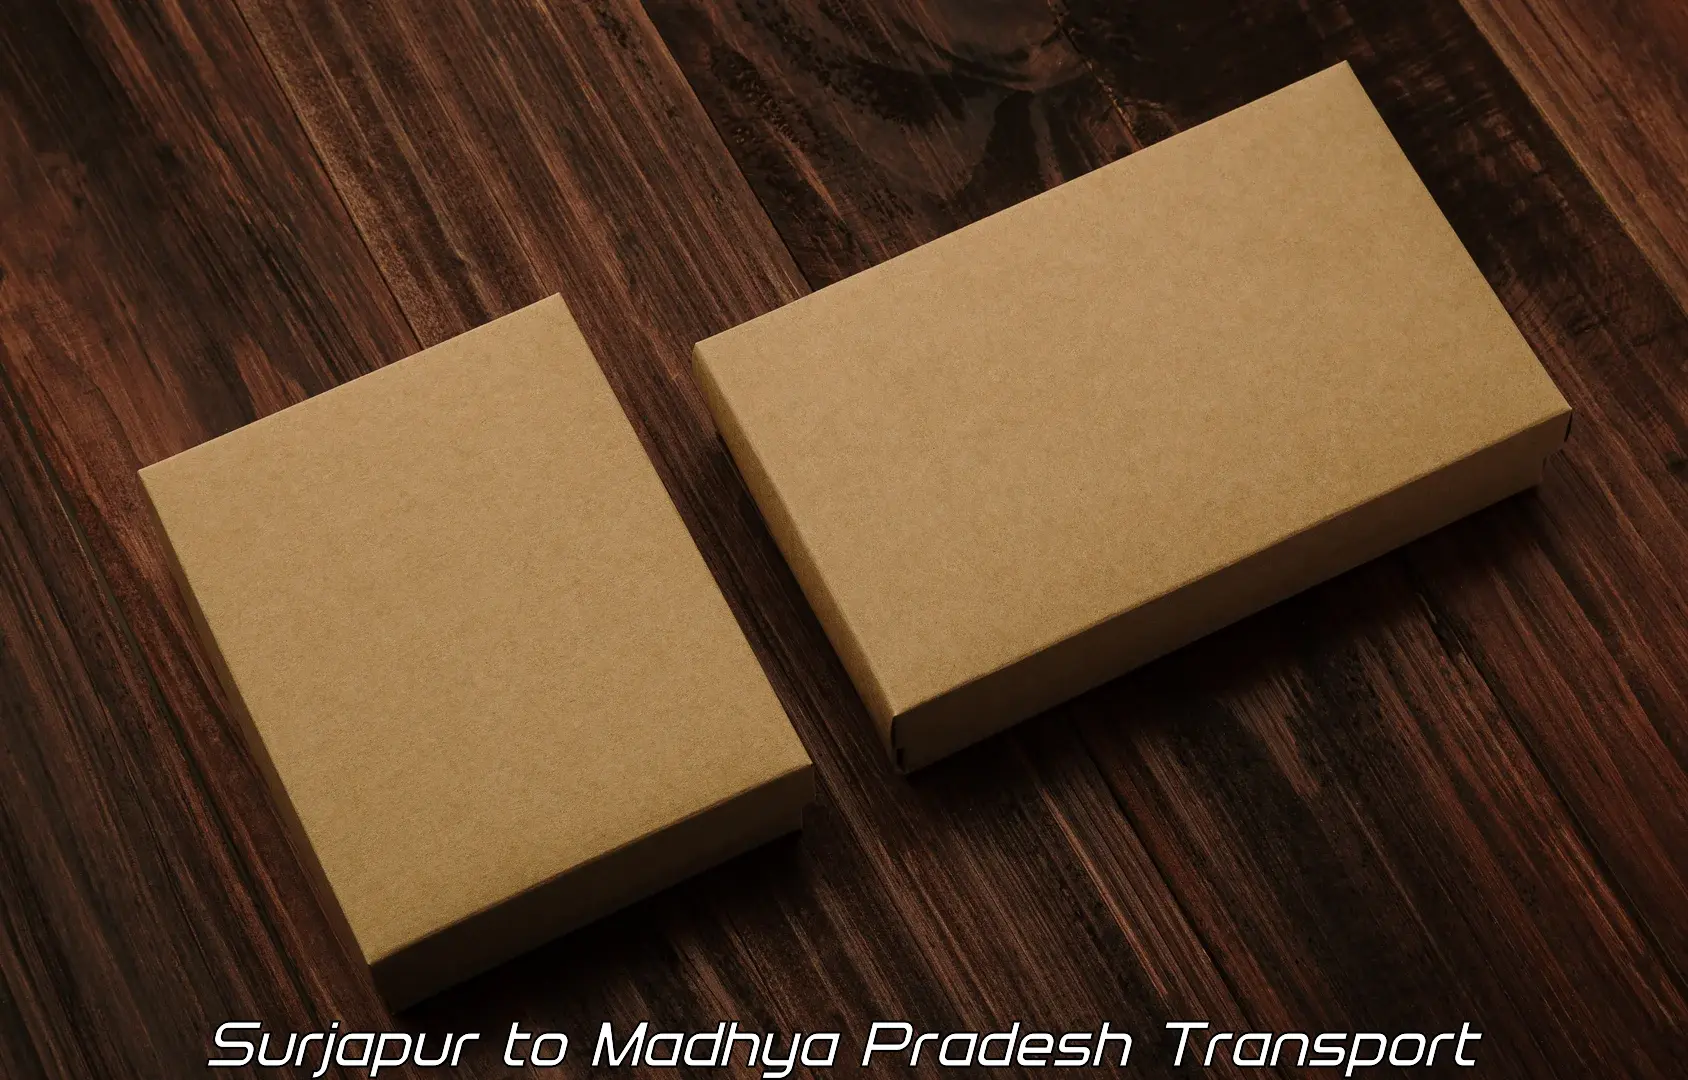 Container transportation services in Surjapur to Madwas